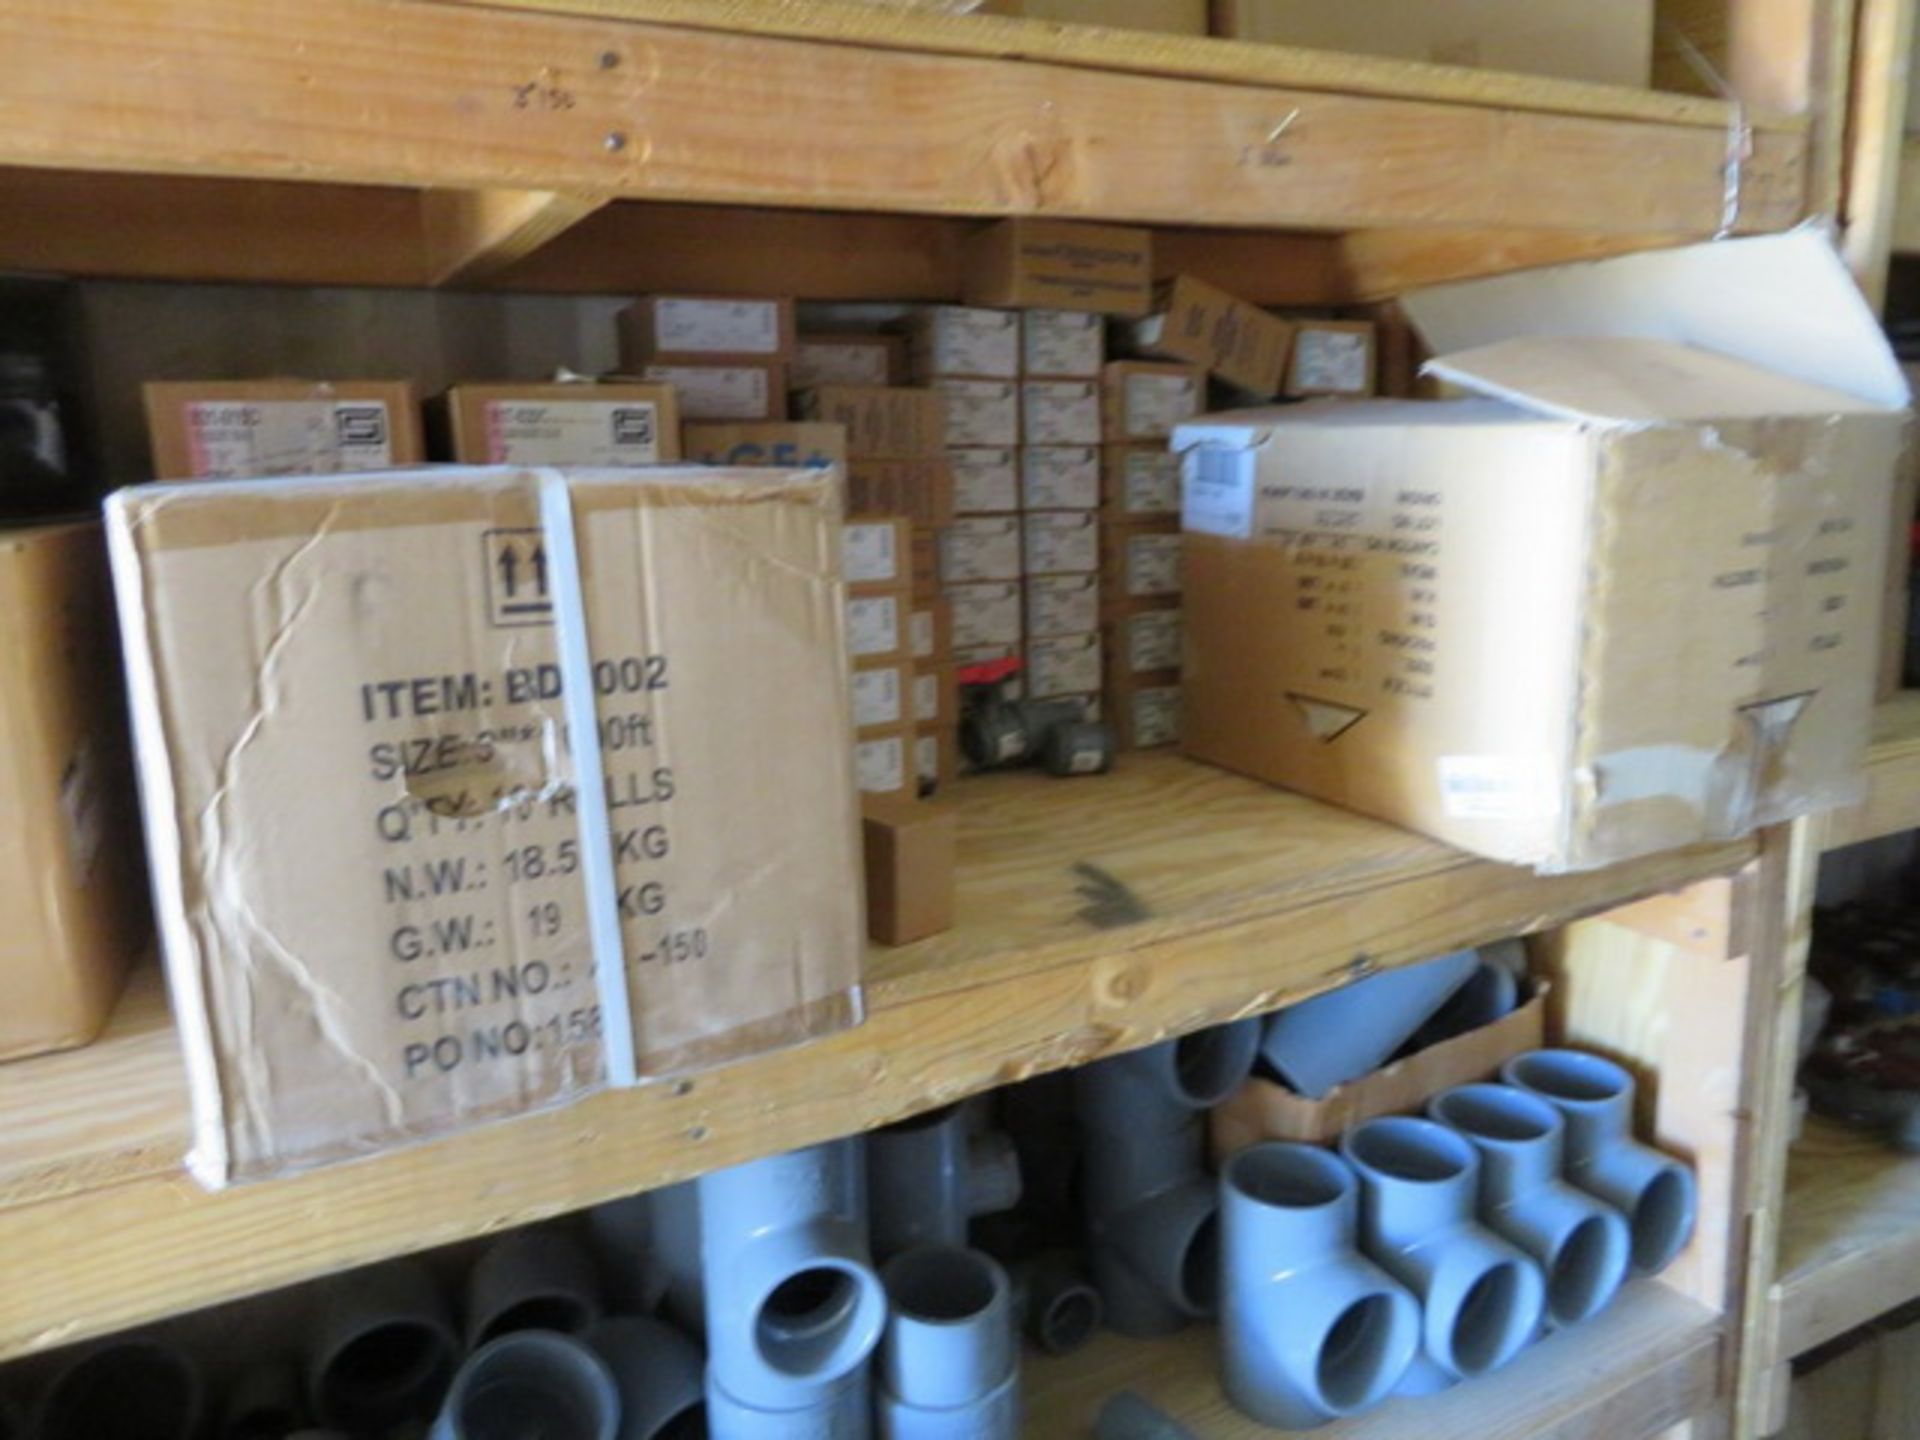 Remaining Contents of Shipping Container. To Include PVC Pipe Fittings, PVC Ball Valves CWC 3/8" - Image 46 of 61